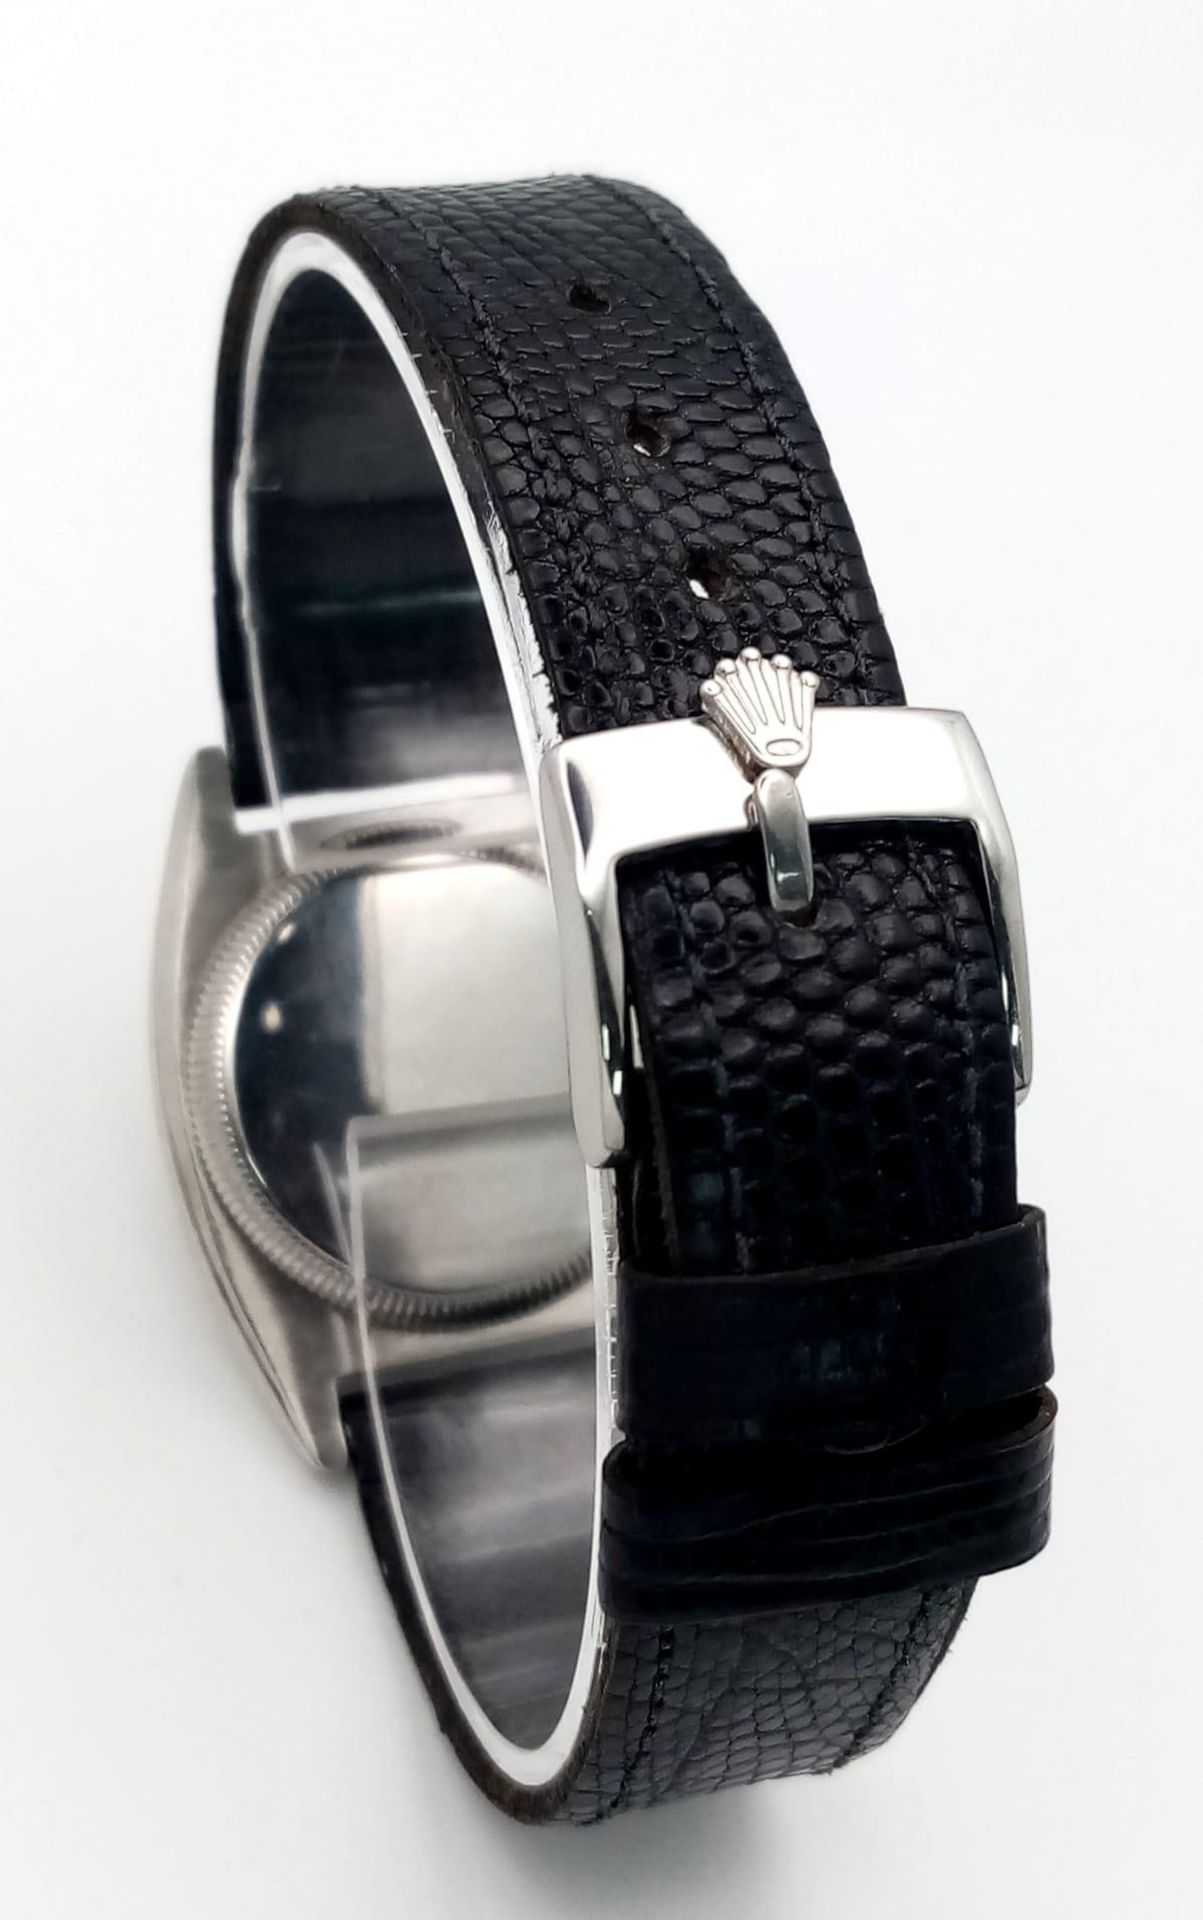 A VINTAGE ROLEX OYSTER RARE MANUAL WIND (ALSO KNOWN AS THE ROLEX "VICEROY") ON A BLACK LEARHER STRAP - Bild 5 aus 9